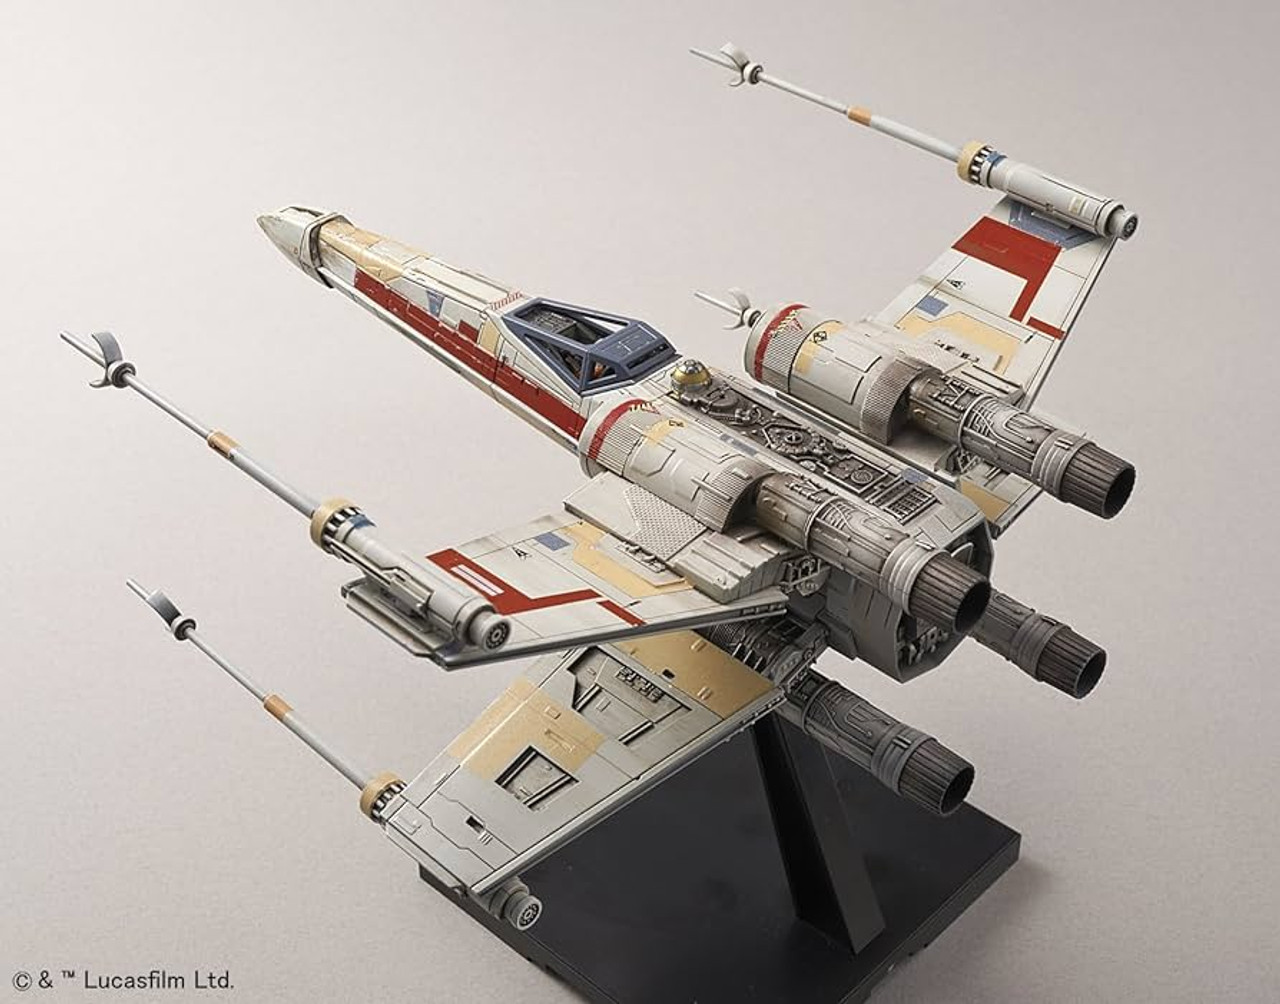 Bandai 5064103 1/72 X-Wing Fighter